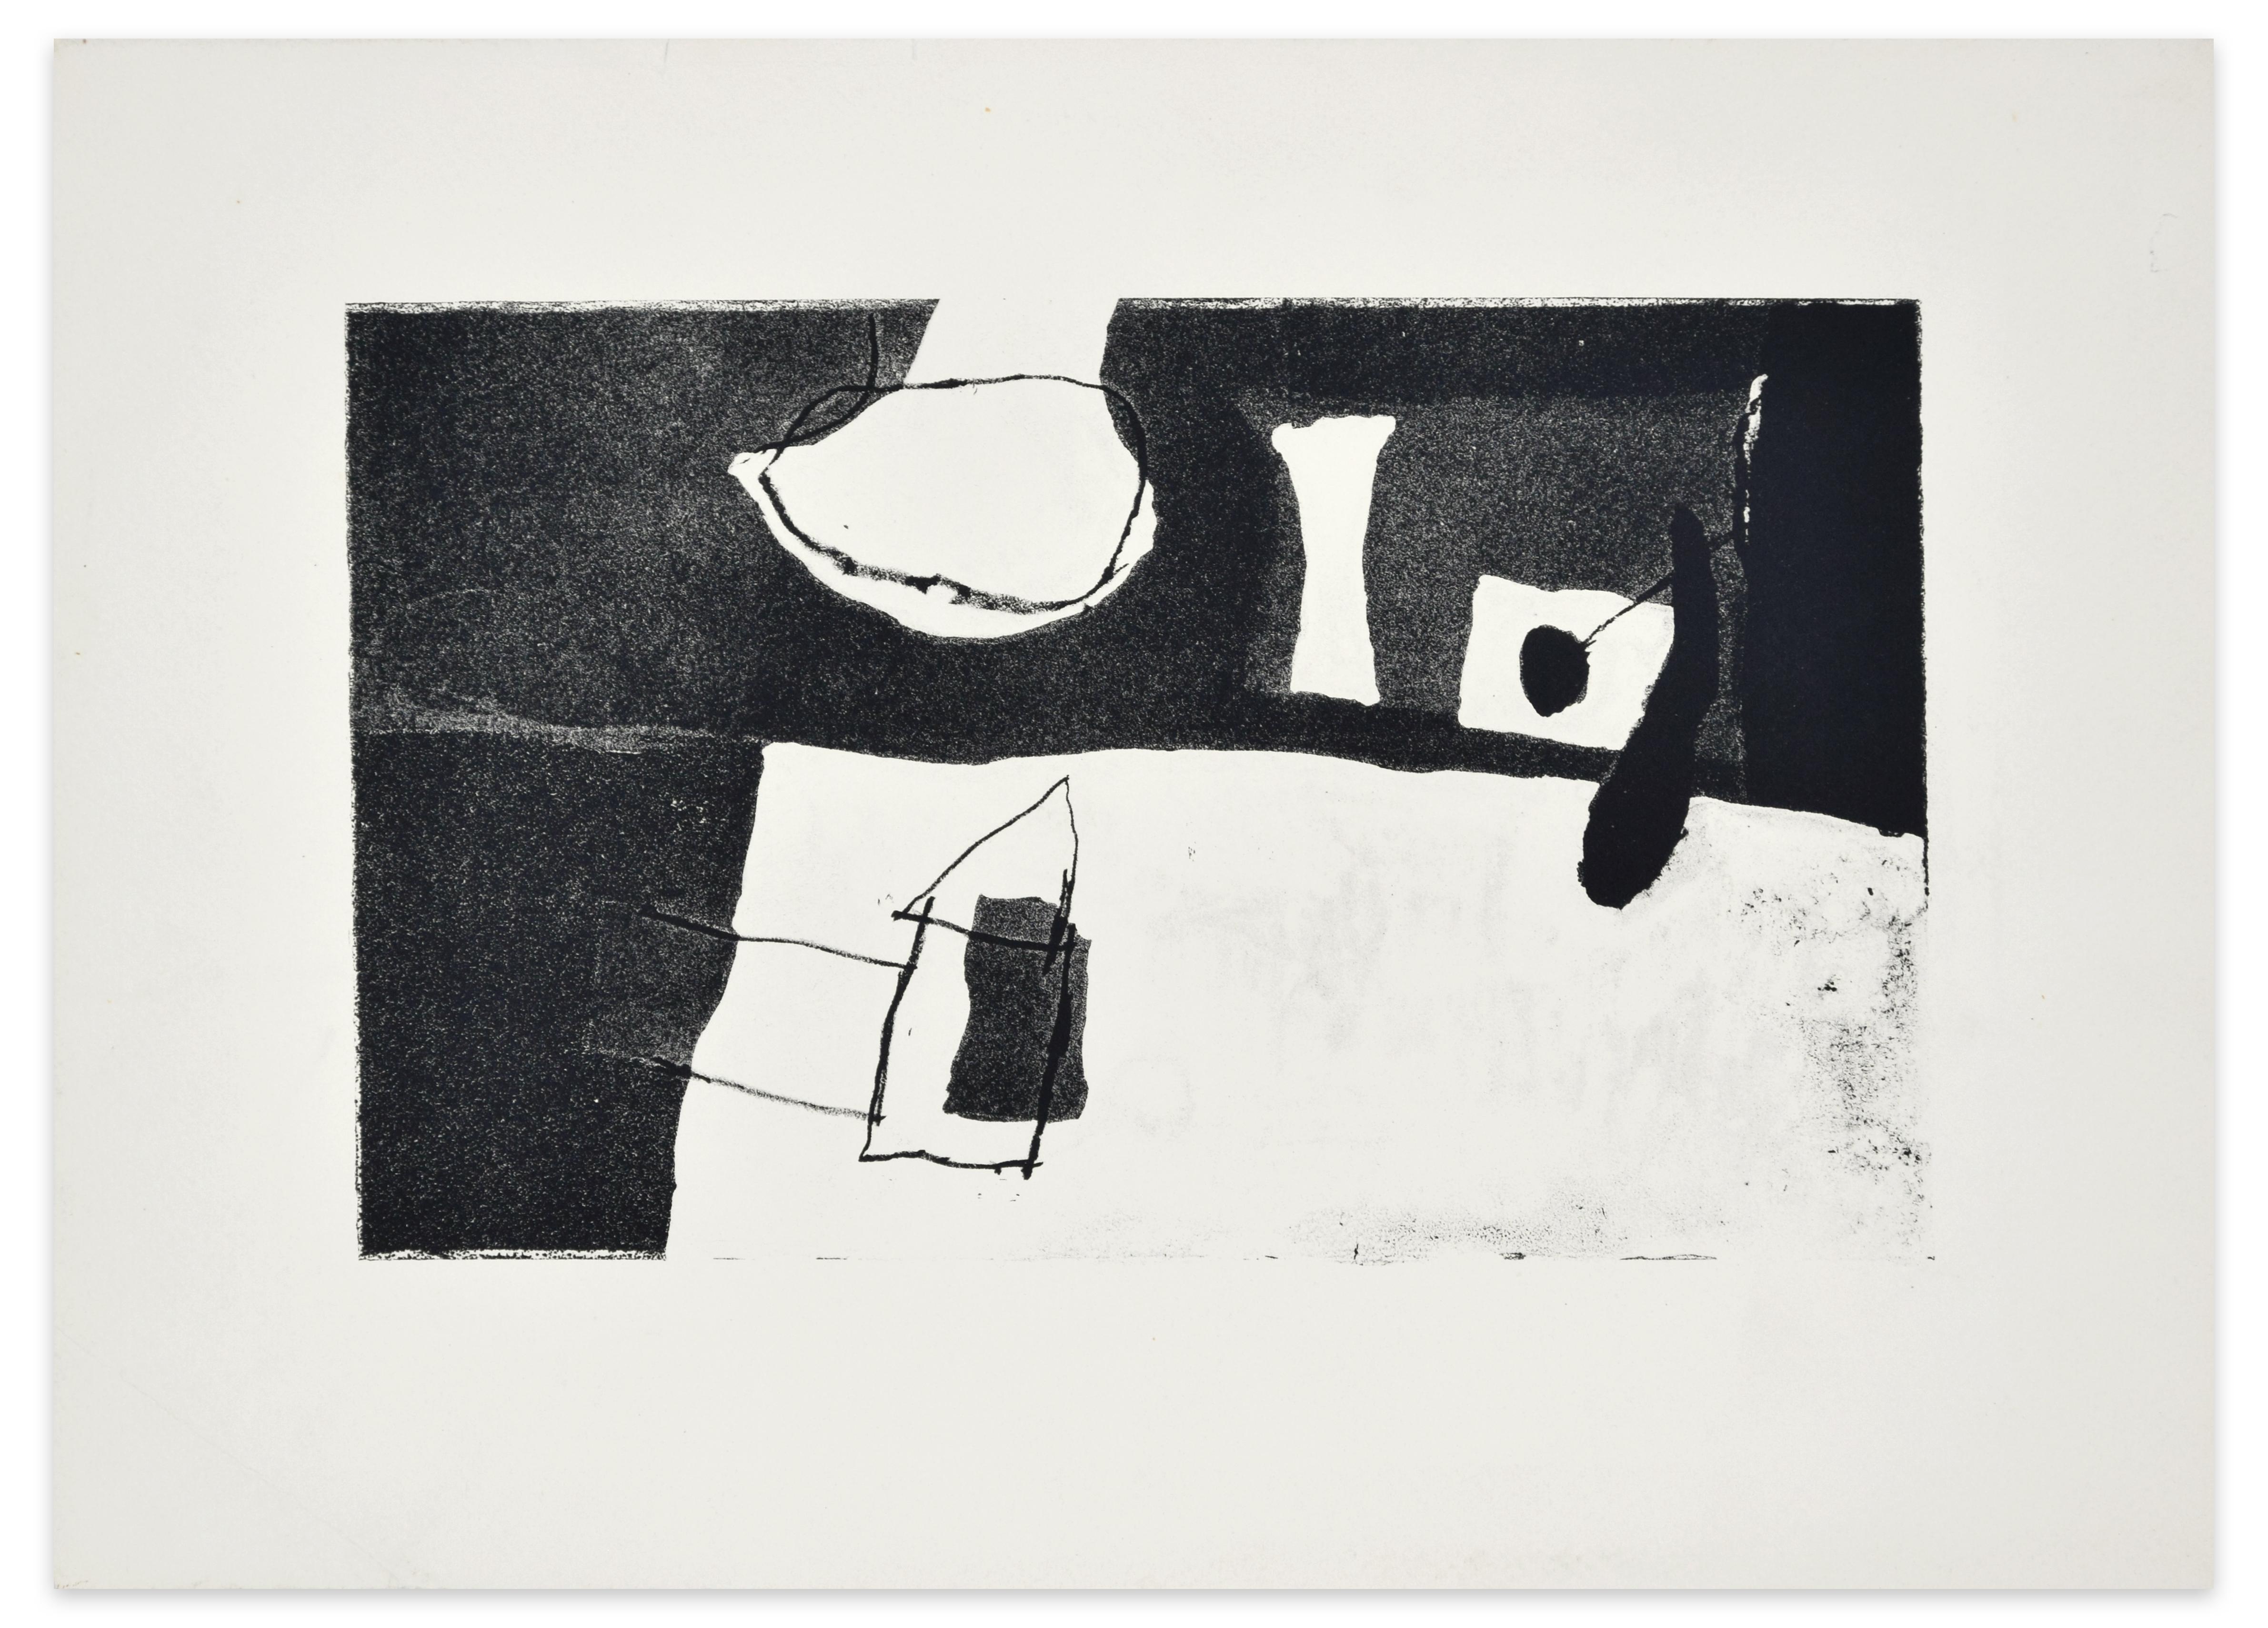 Black Composition is an original black and white etching, realized by Afro Basaldella in the 1970s.

Not signed and not numbered.

Good conditions except fors some light folds and very little tears along the margin.